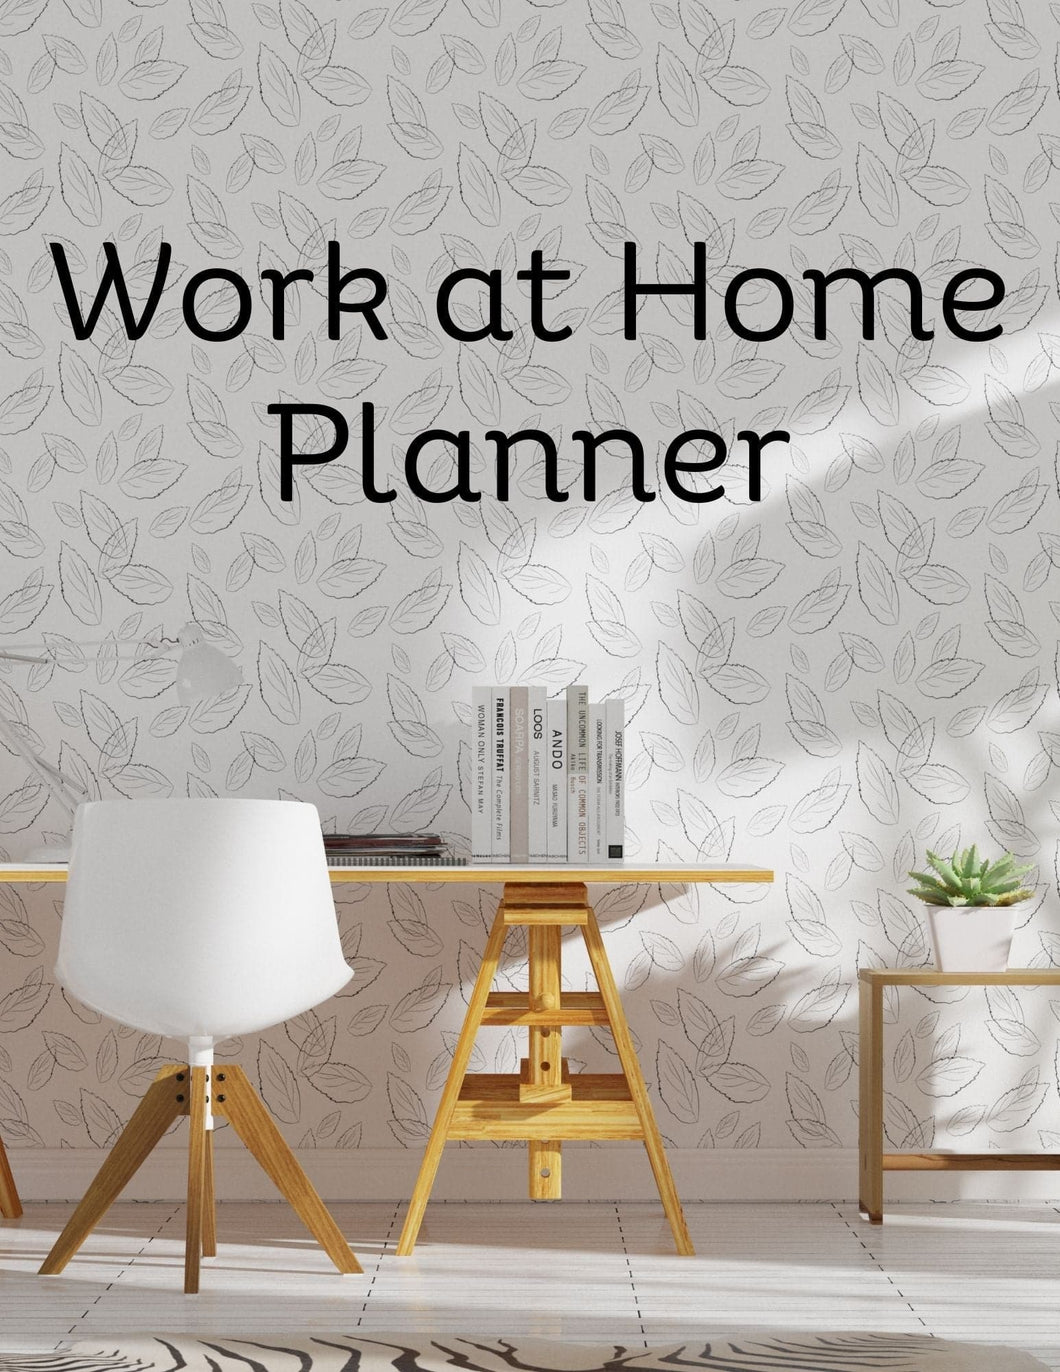 Work at Home Planner